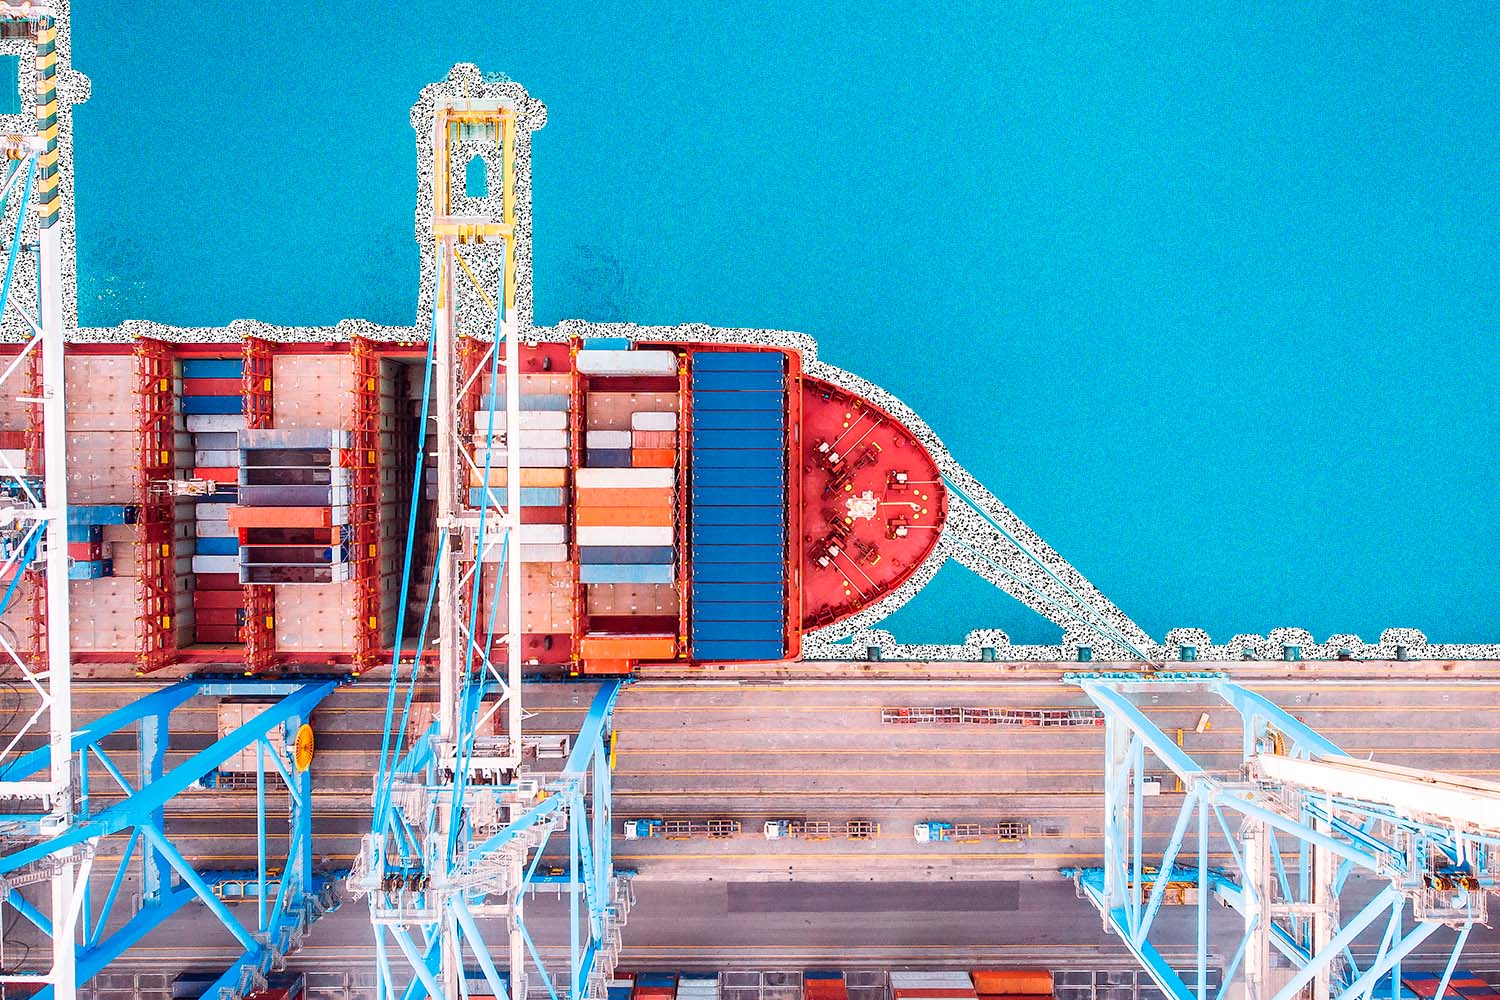 Boat in a port with shipping containers